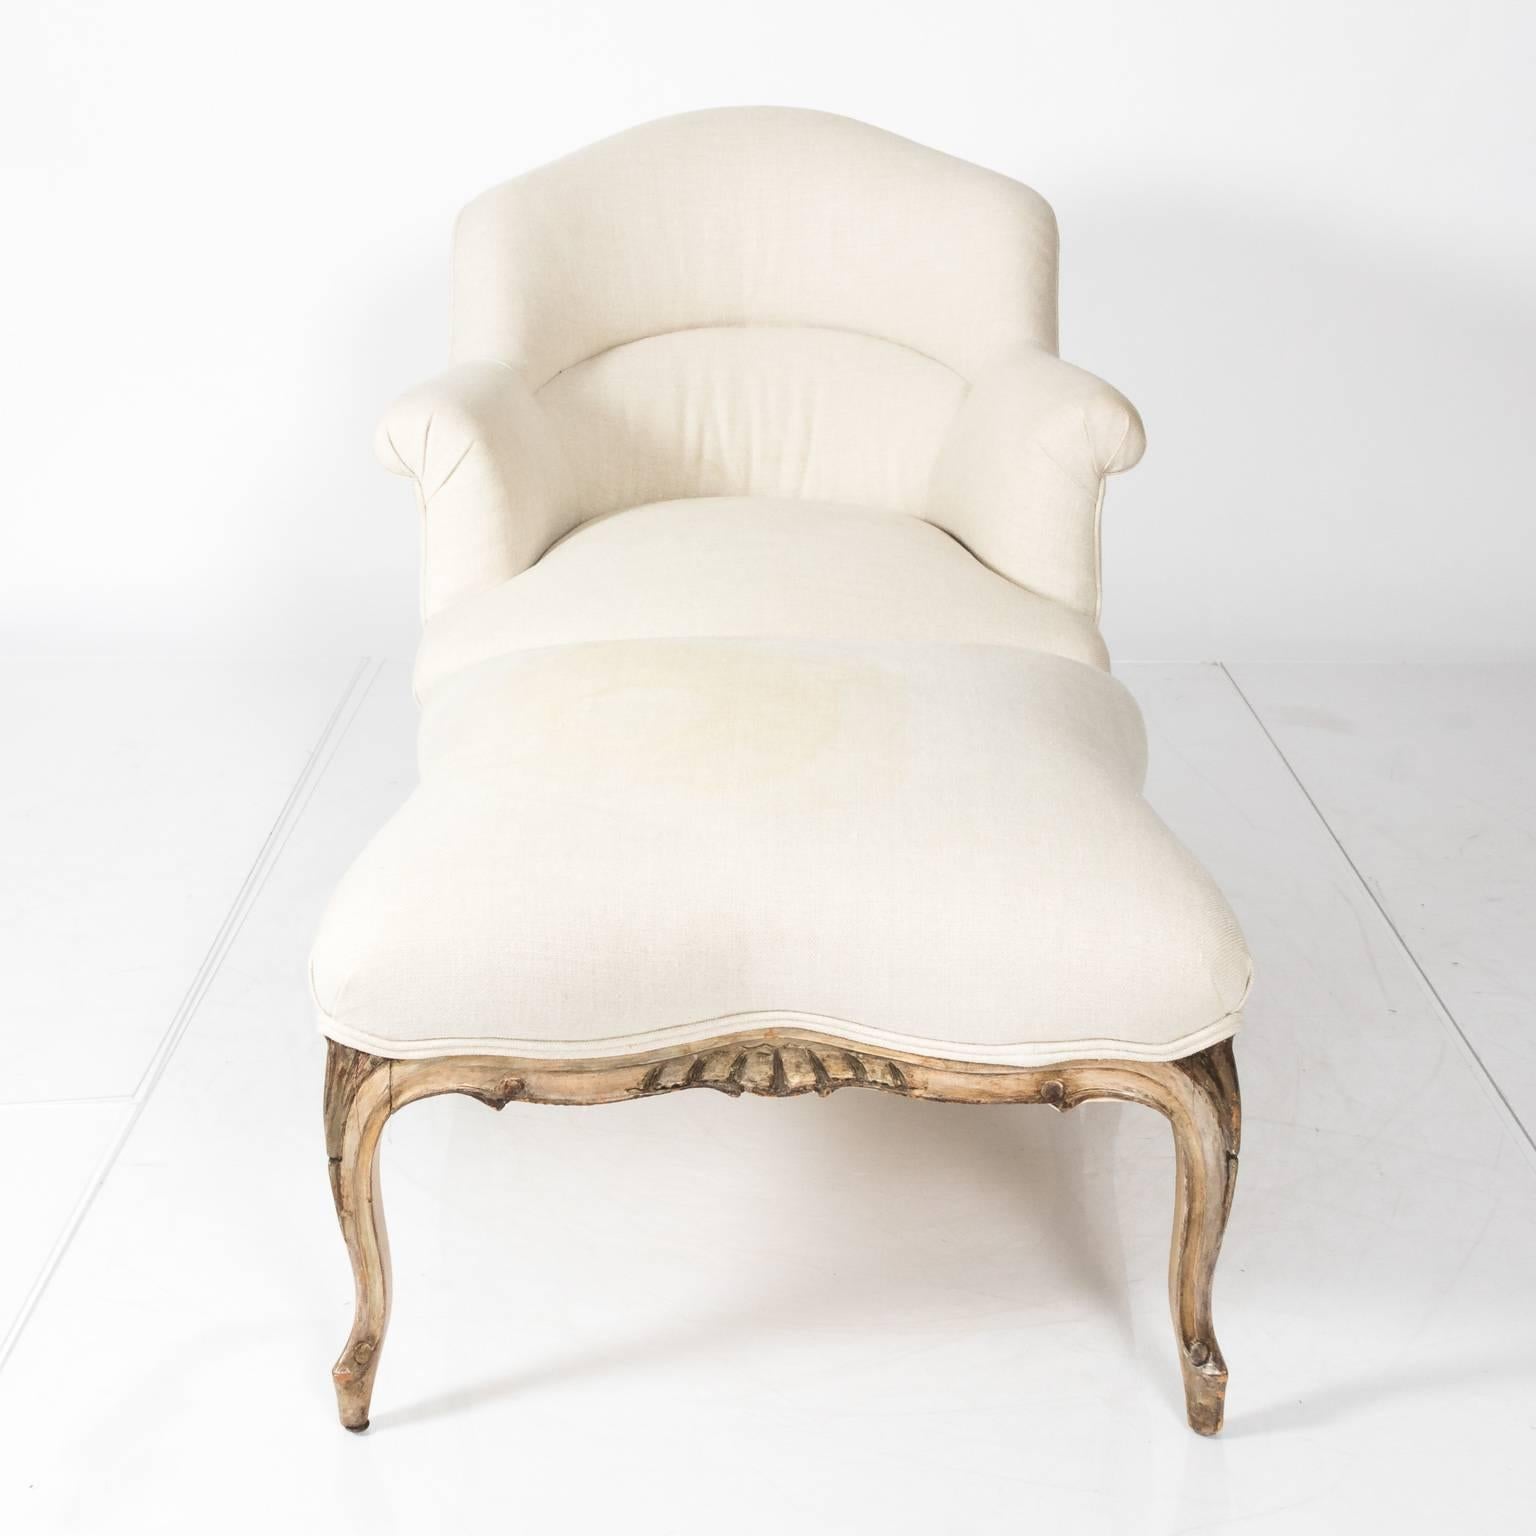 Louis XV style upholstered chair and ottoman featuring a wood frame and cabriole legs, circa 1930. There is a light stain on the upholstery of the ottoman.